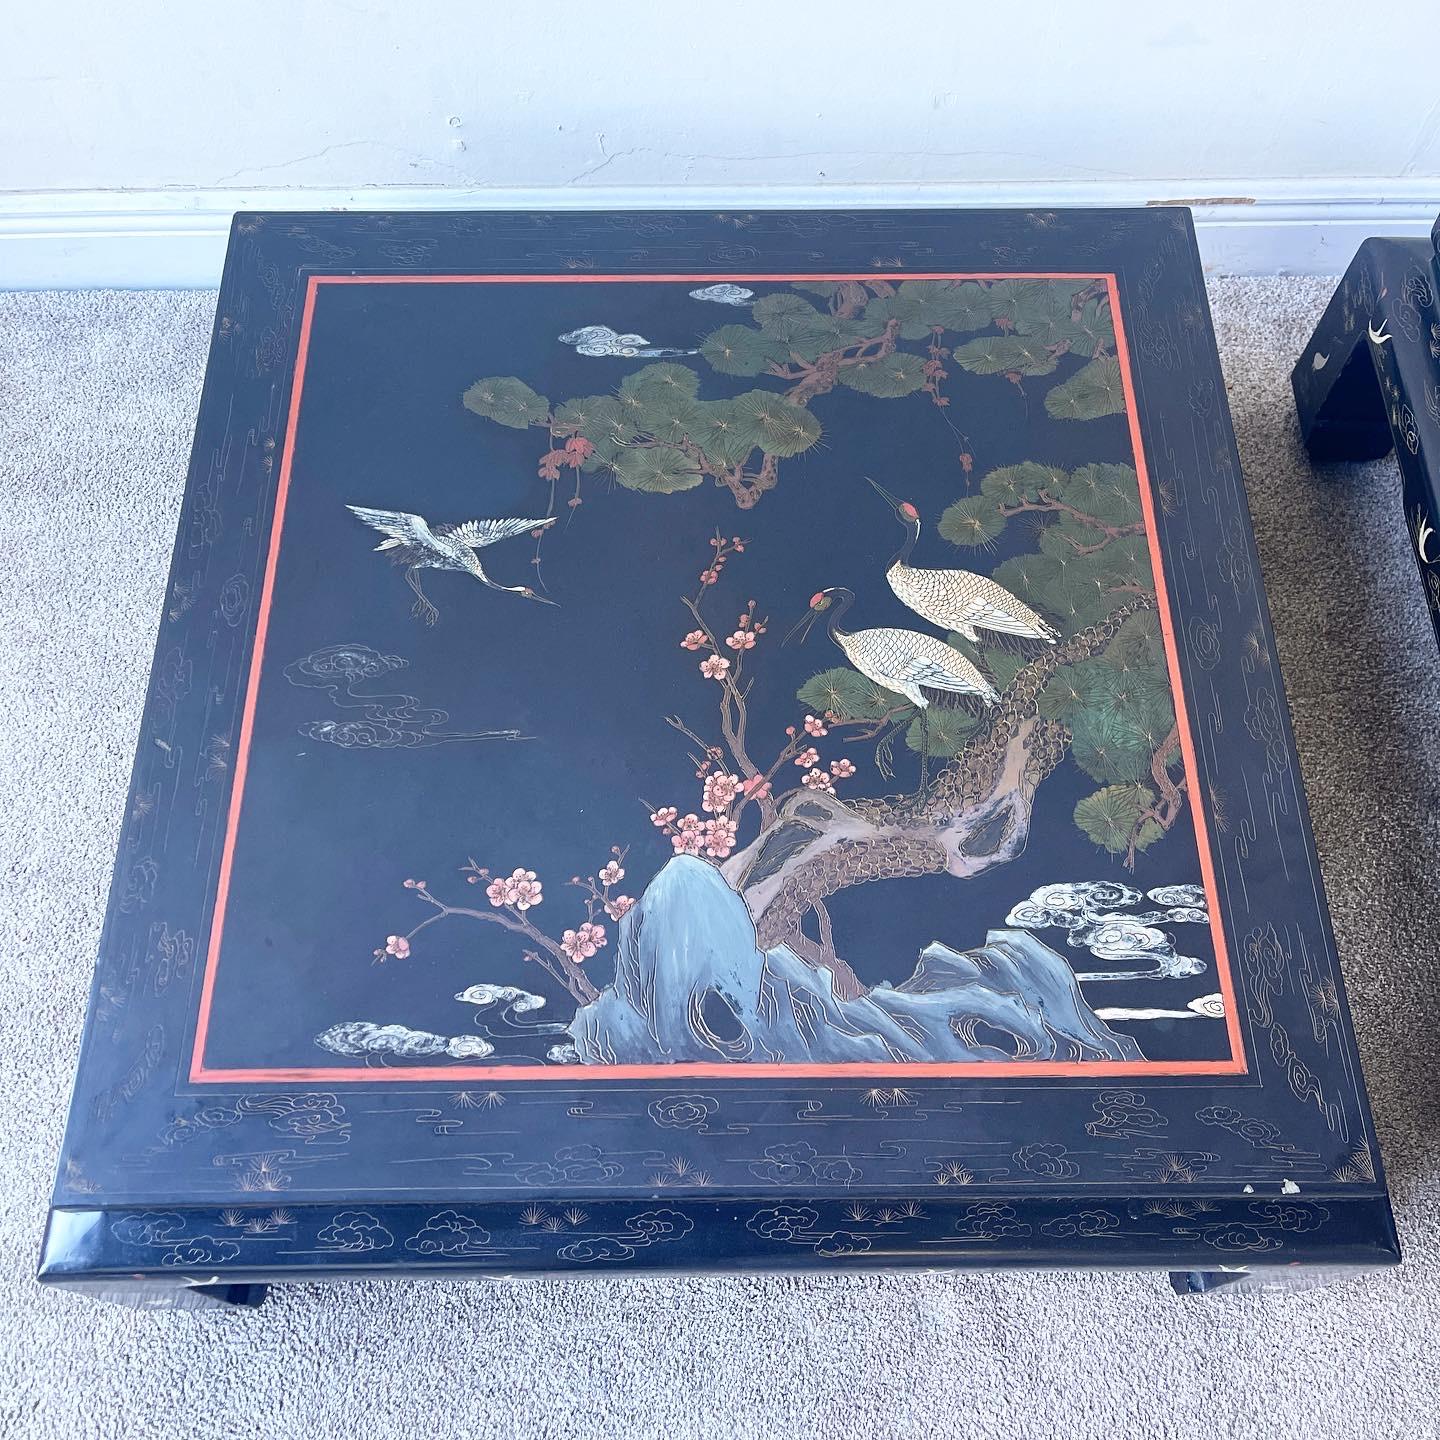 Amazing pair of black lacquered coffee tables made in Hong Kong. Stunning depictions of birds and nature hand painted onto each table.

Additional information:
Material: Lacquer, Wood
Color: Black
Style: Asian, Chinoiserie
Time Period: 1970s
Place